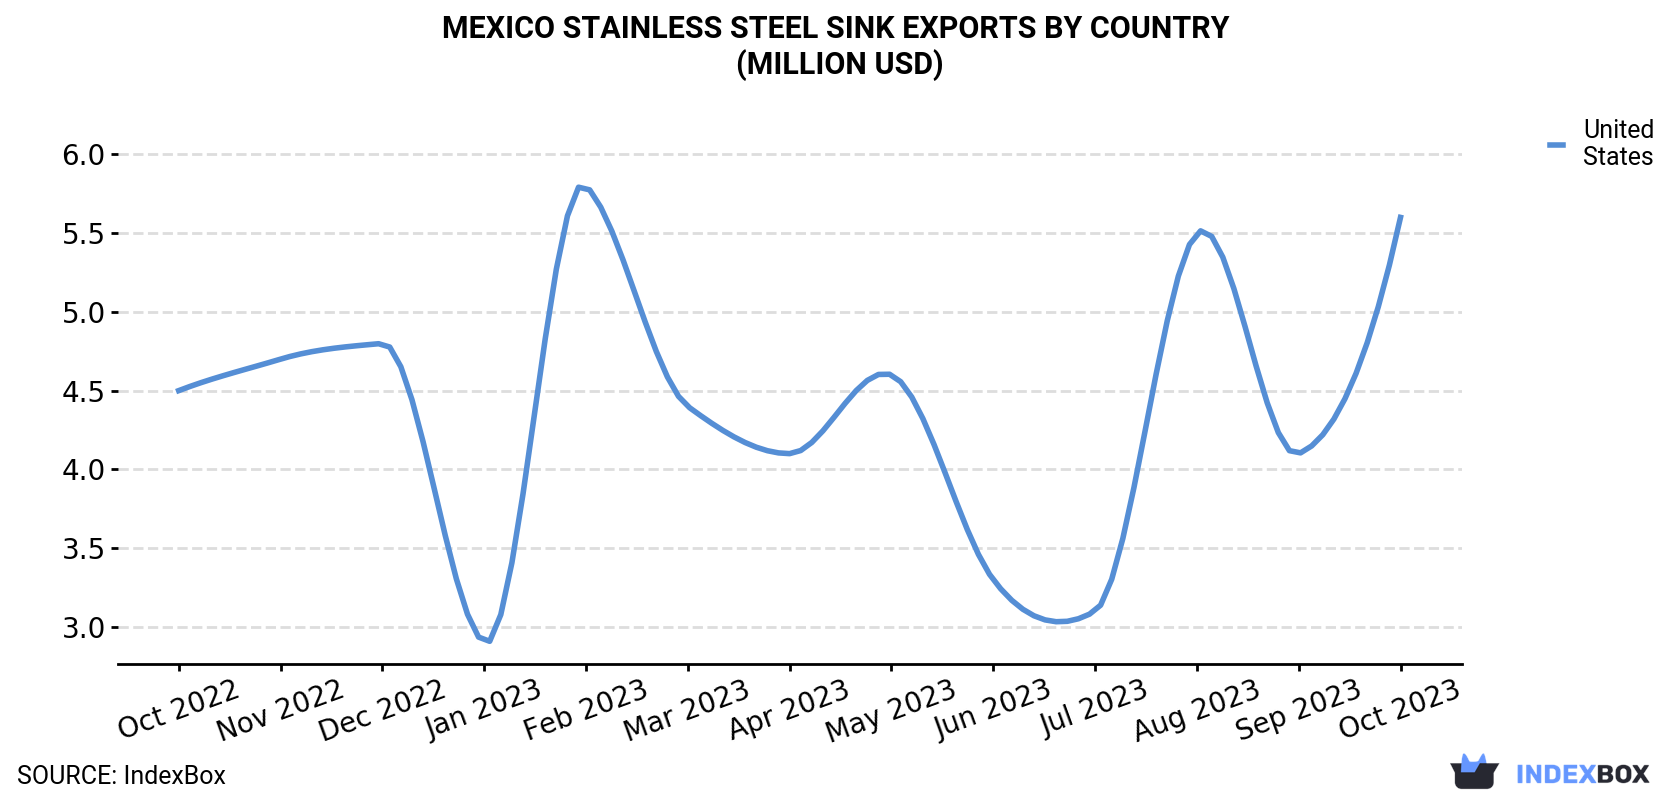 Mexico Stainless Steel Sink Exports By Country (Million USD)